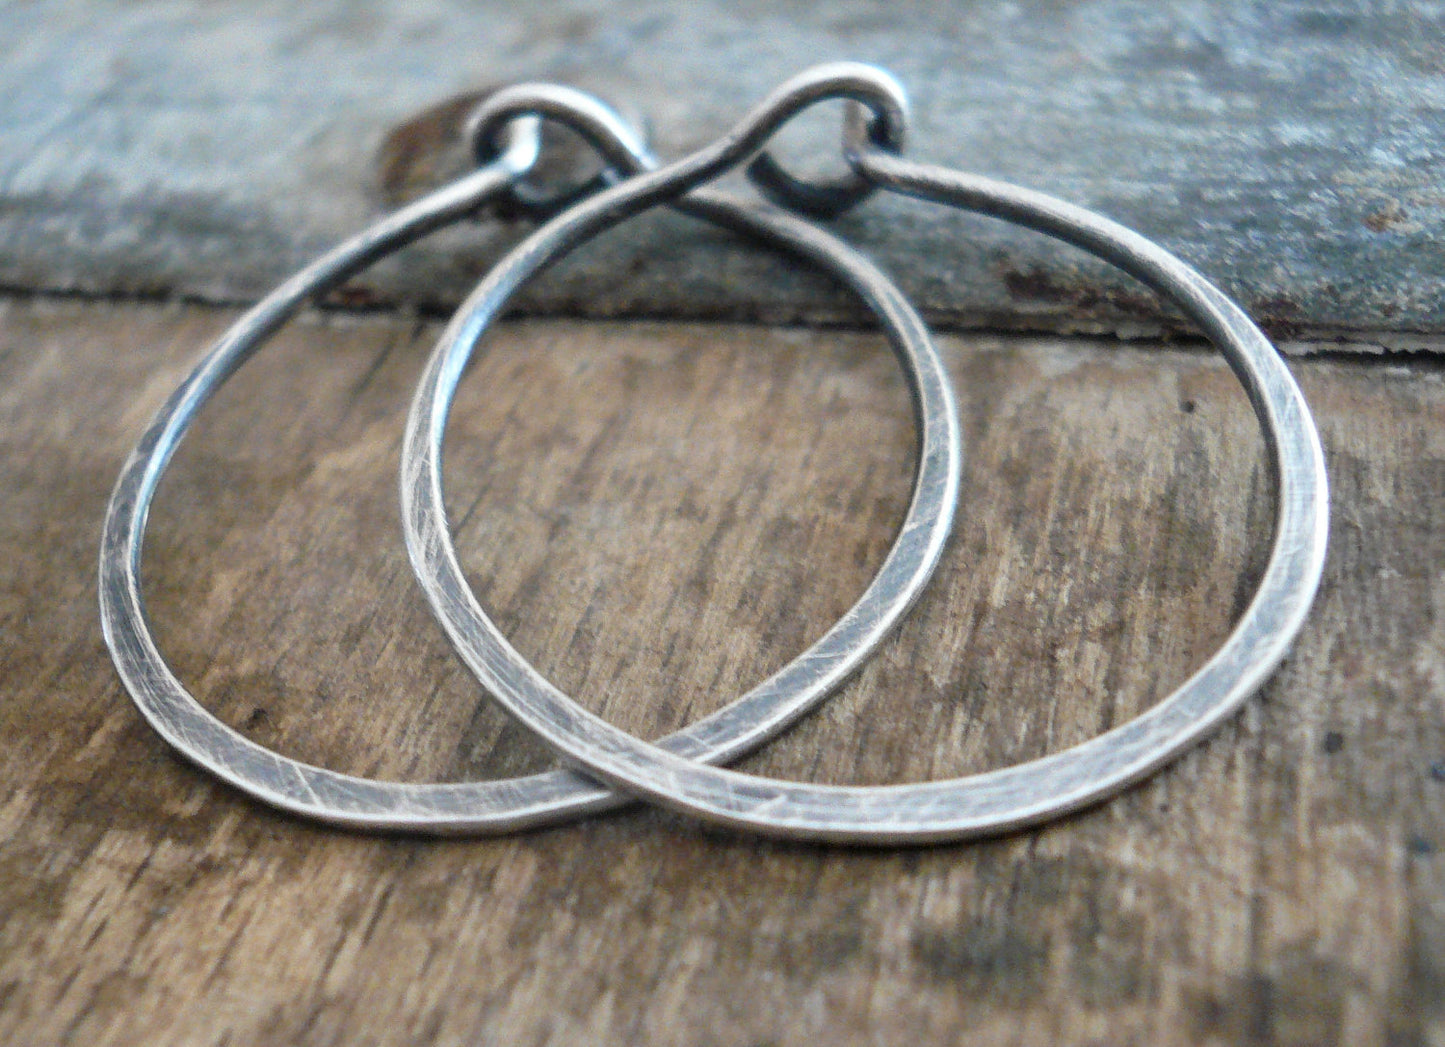 Every Day Hoops - Handmade in Oxidized Sterling Silver. 4 sizes